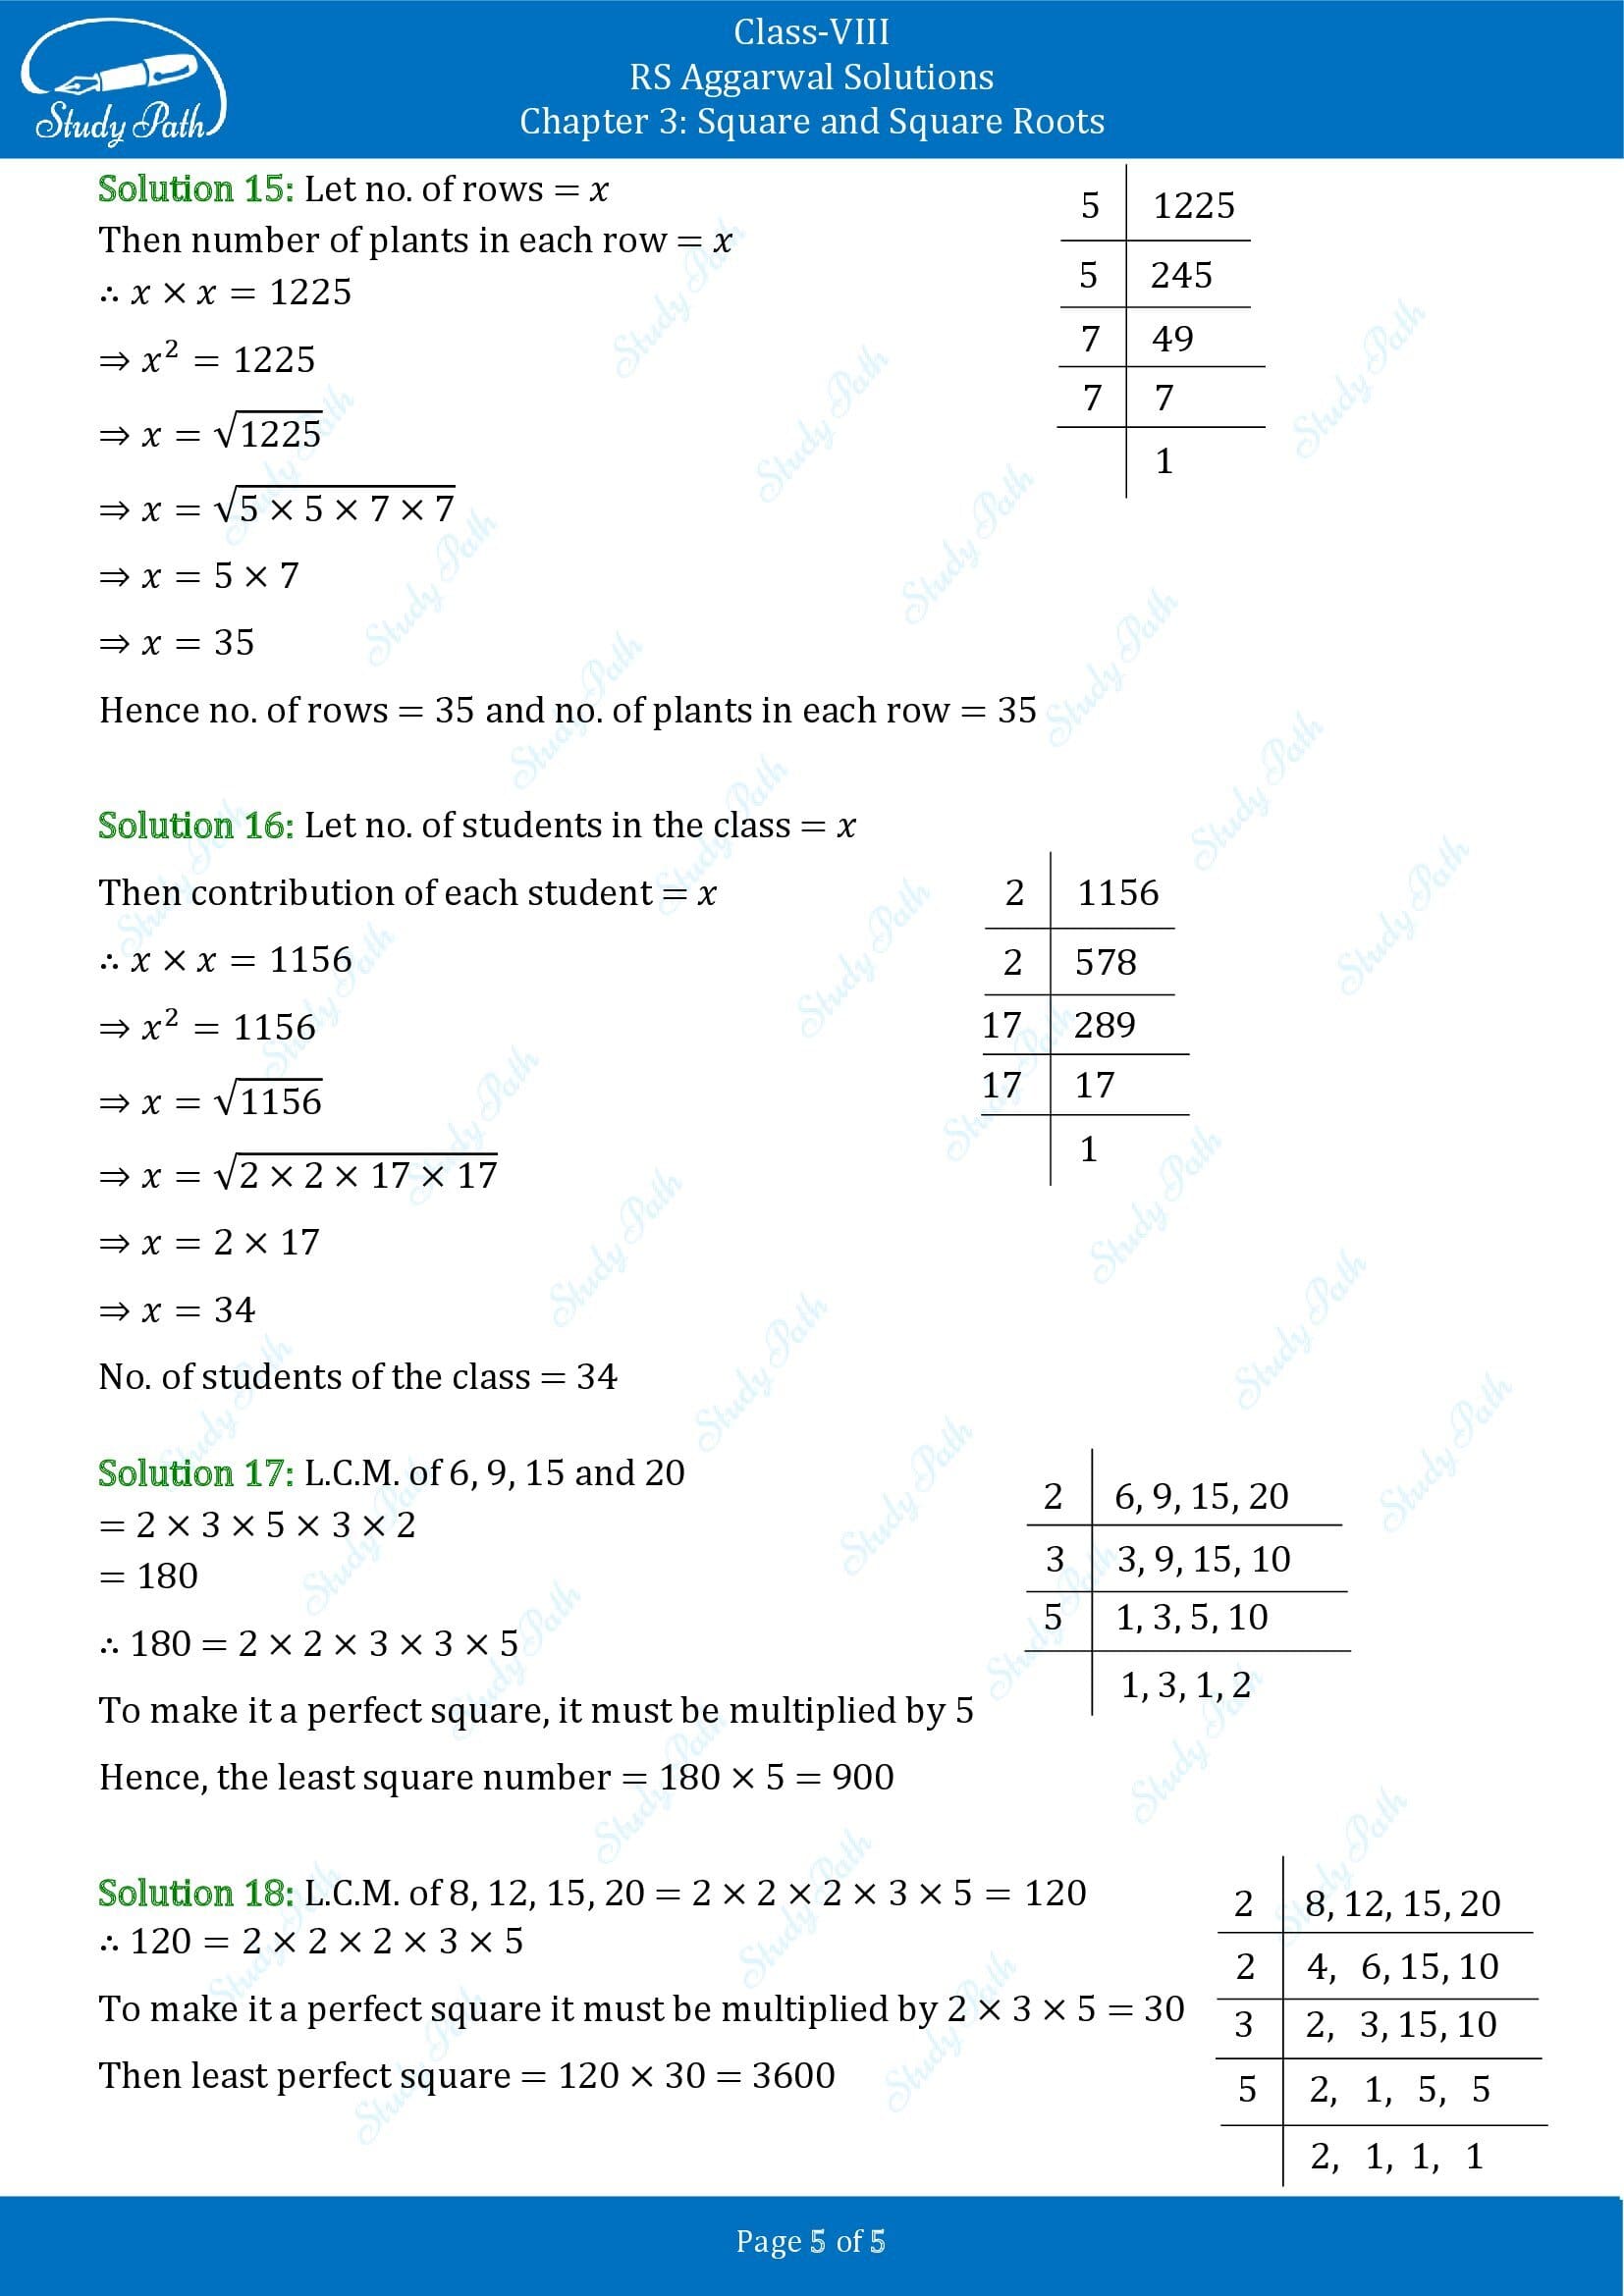 RS Aggarwal Solutions Class 8 Chapter 3 Square and Square Roots Exercise 3D 0005